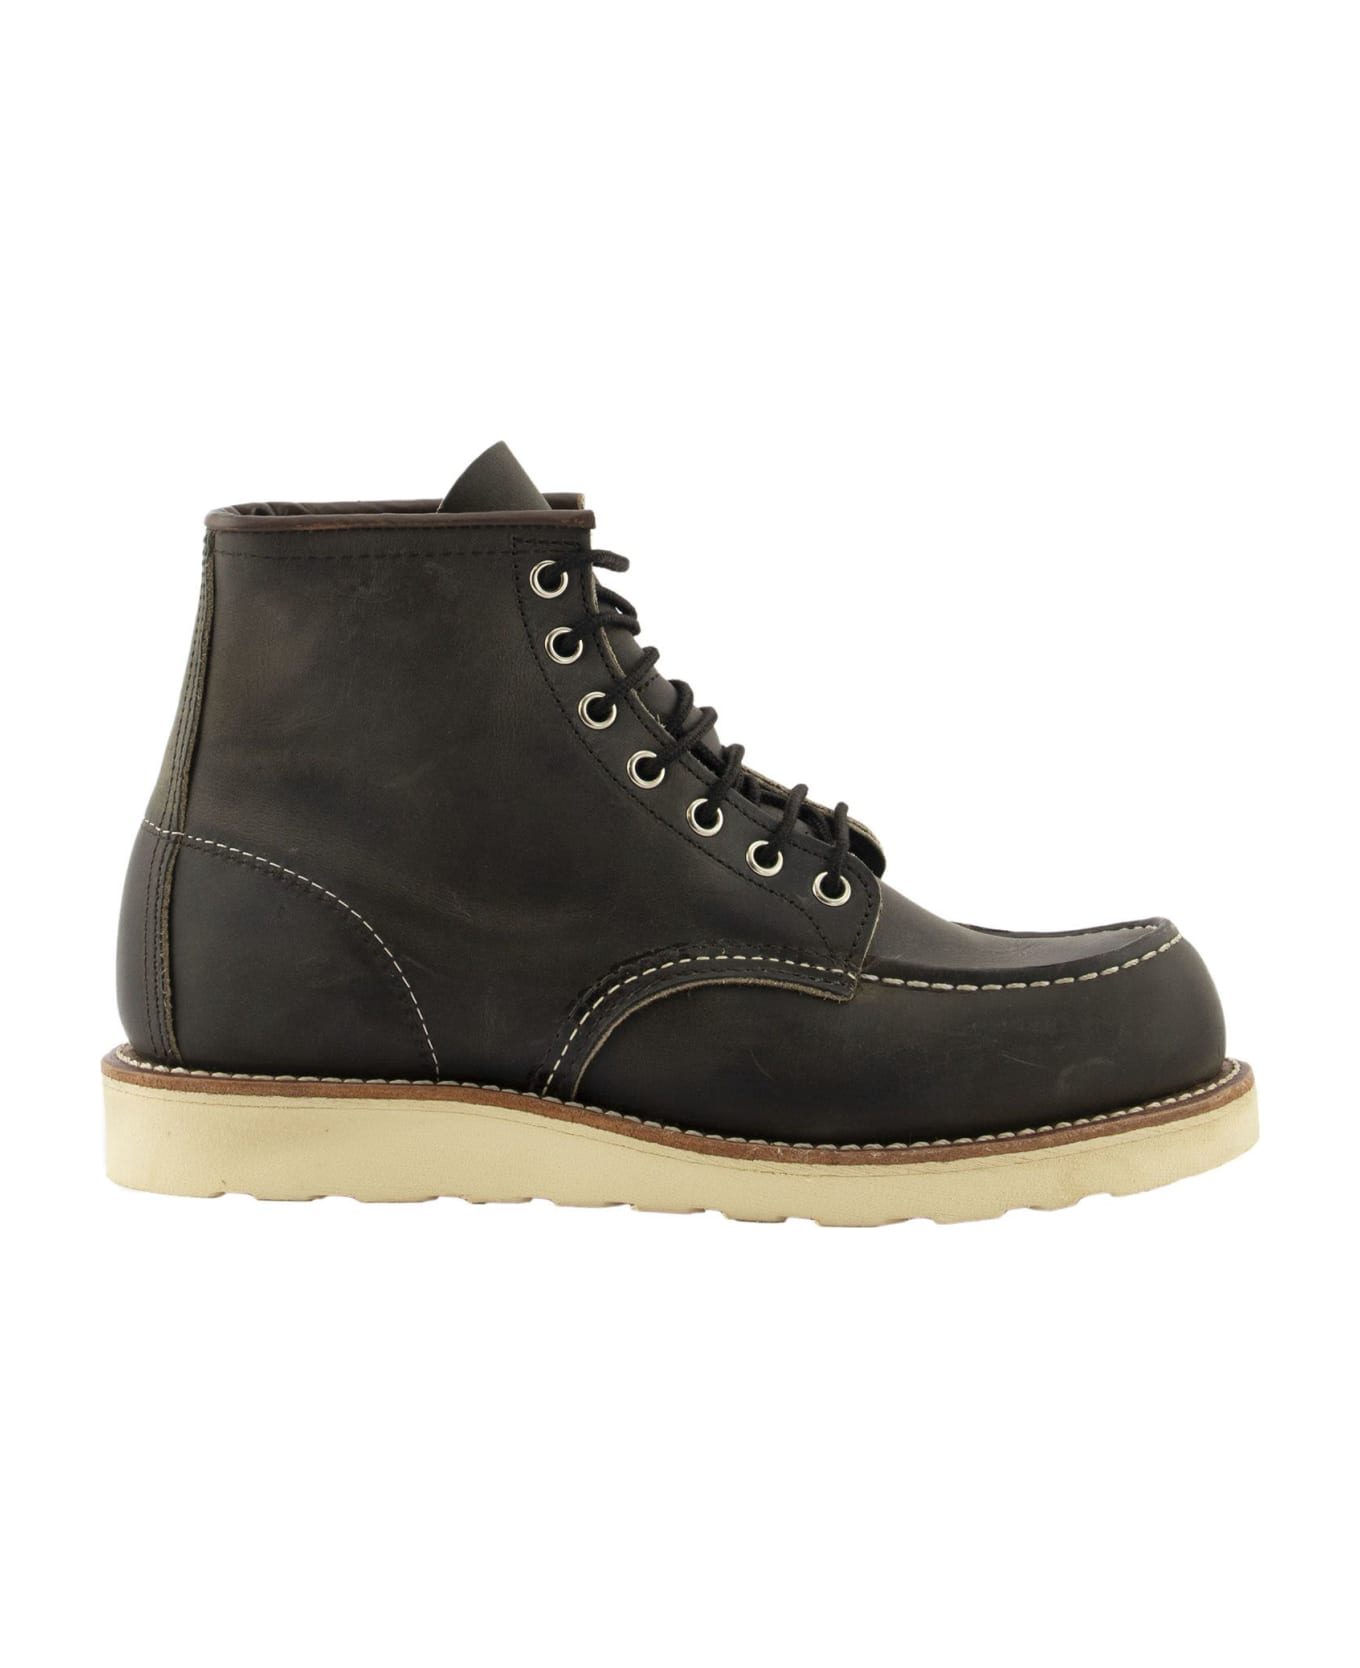 Red Wing Classic Moc - Rough And Tough Leather Boot - Charcoal